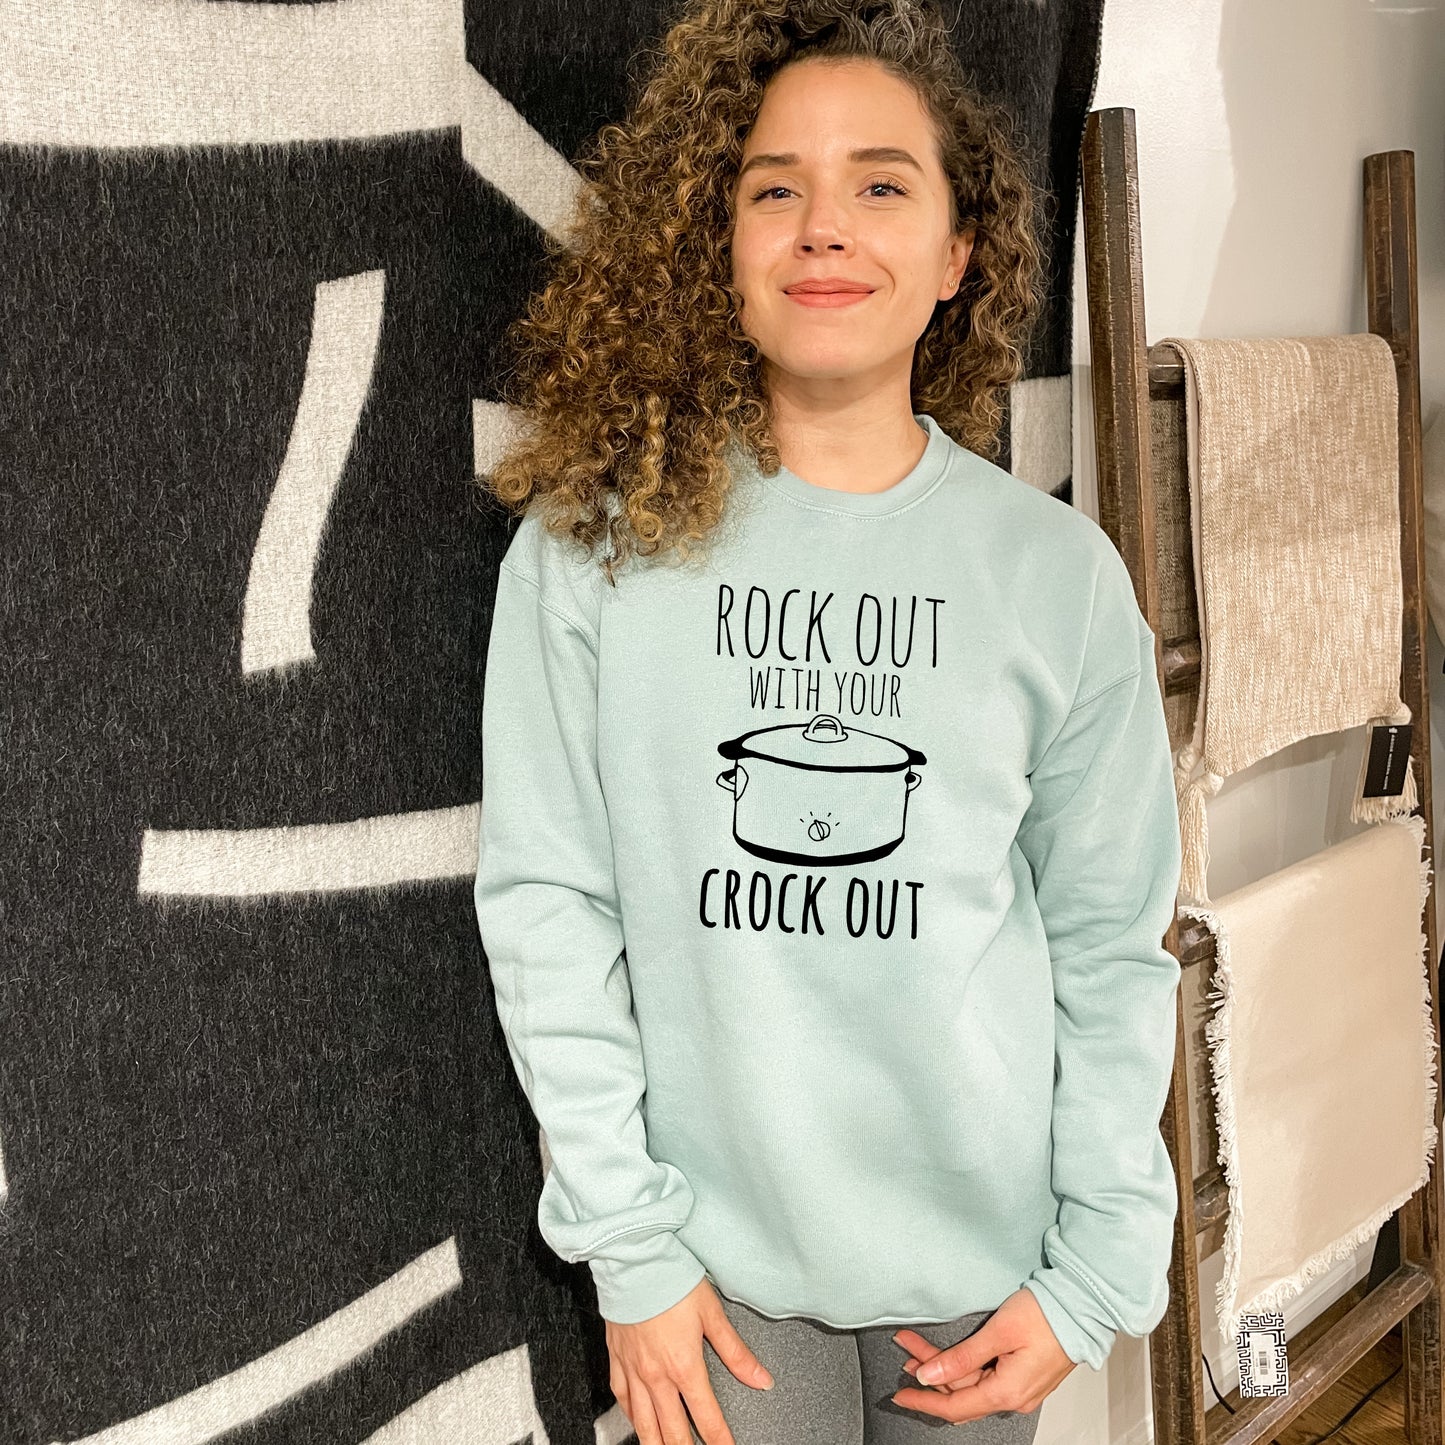 Rock Out With Your Crock Out - Unisex Sweatshirt - Heather Gray or Dusty Blue